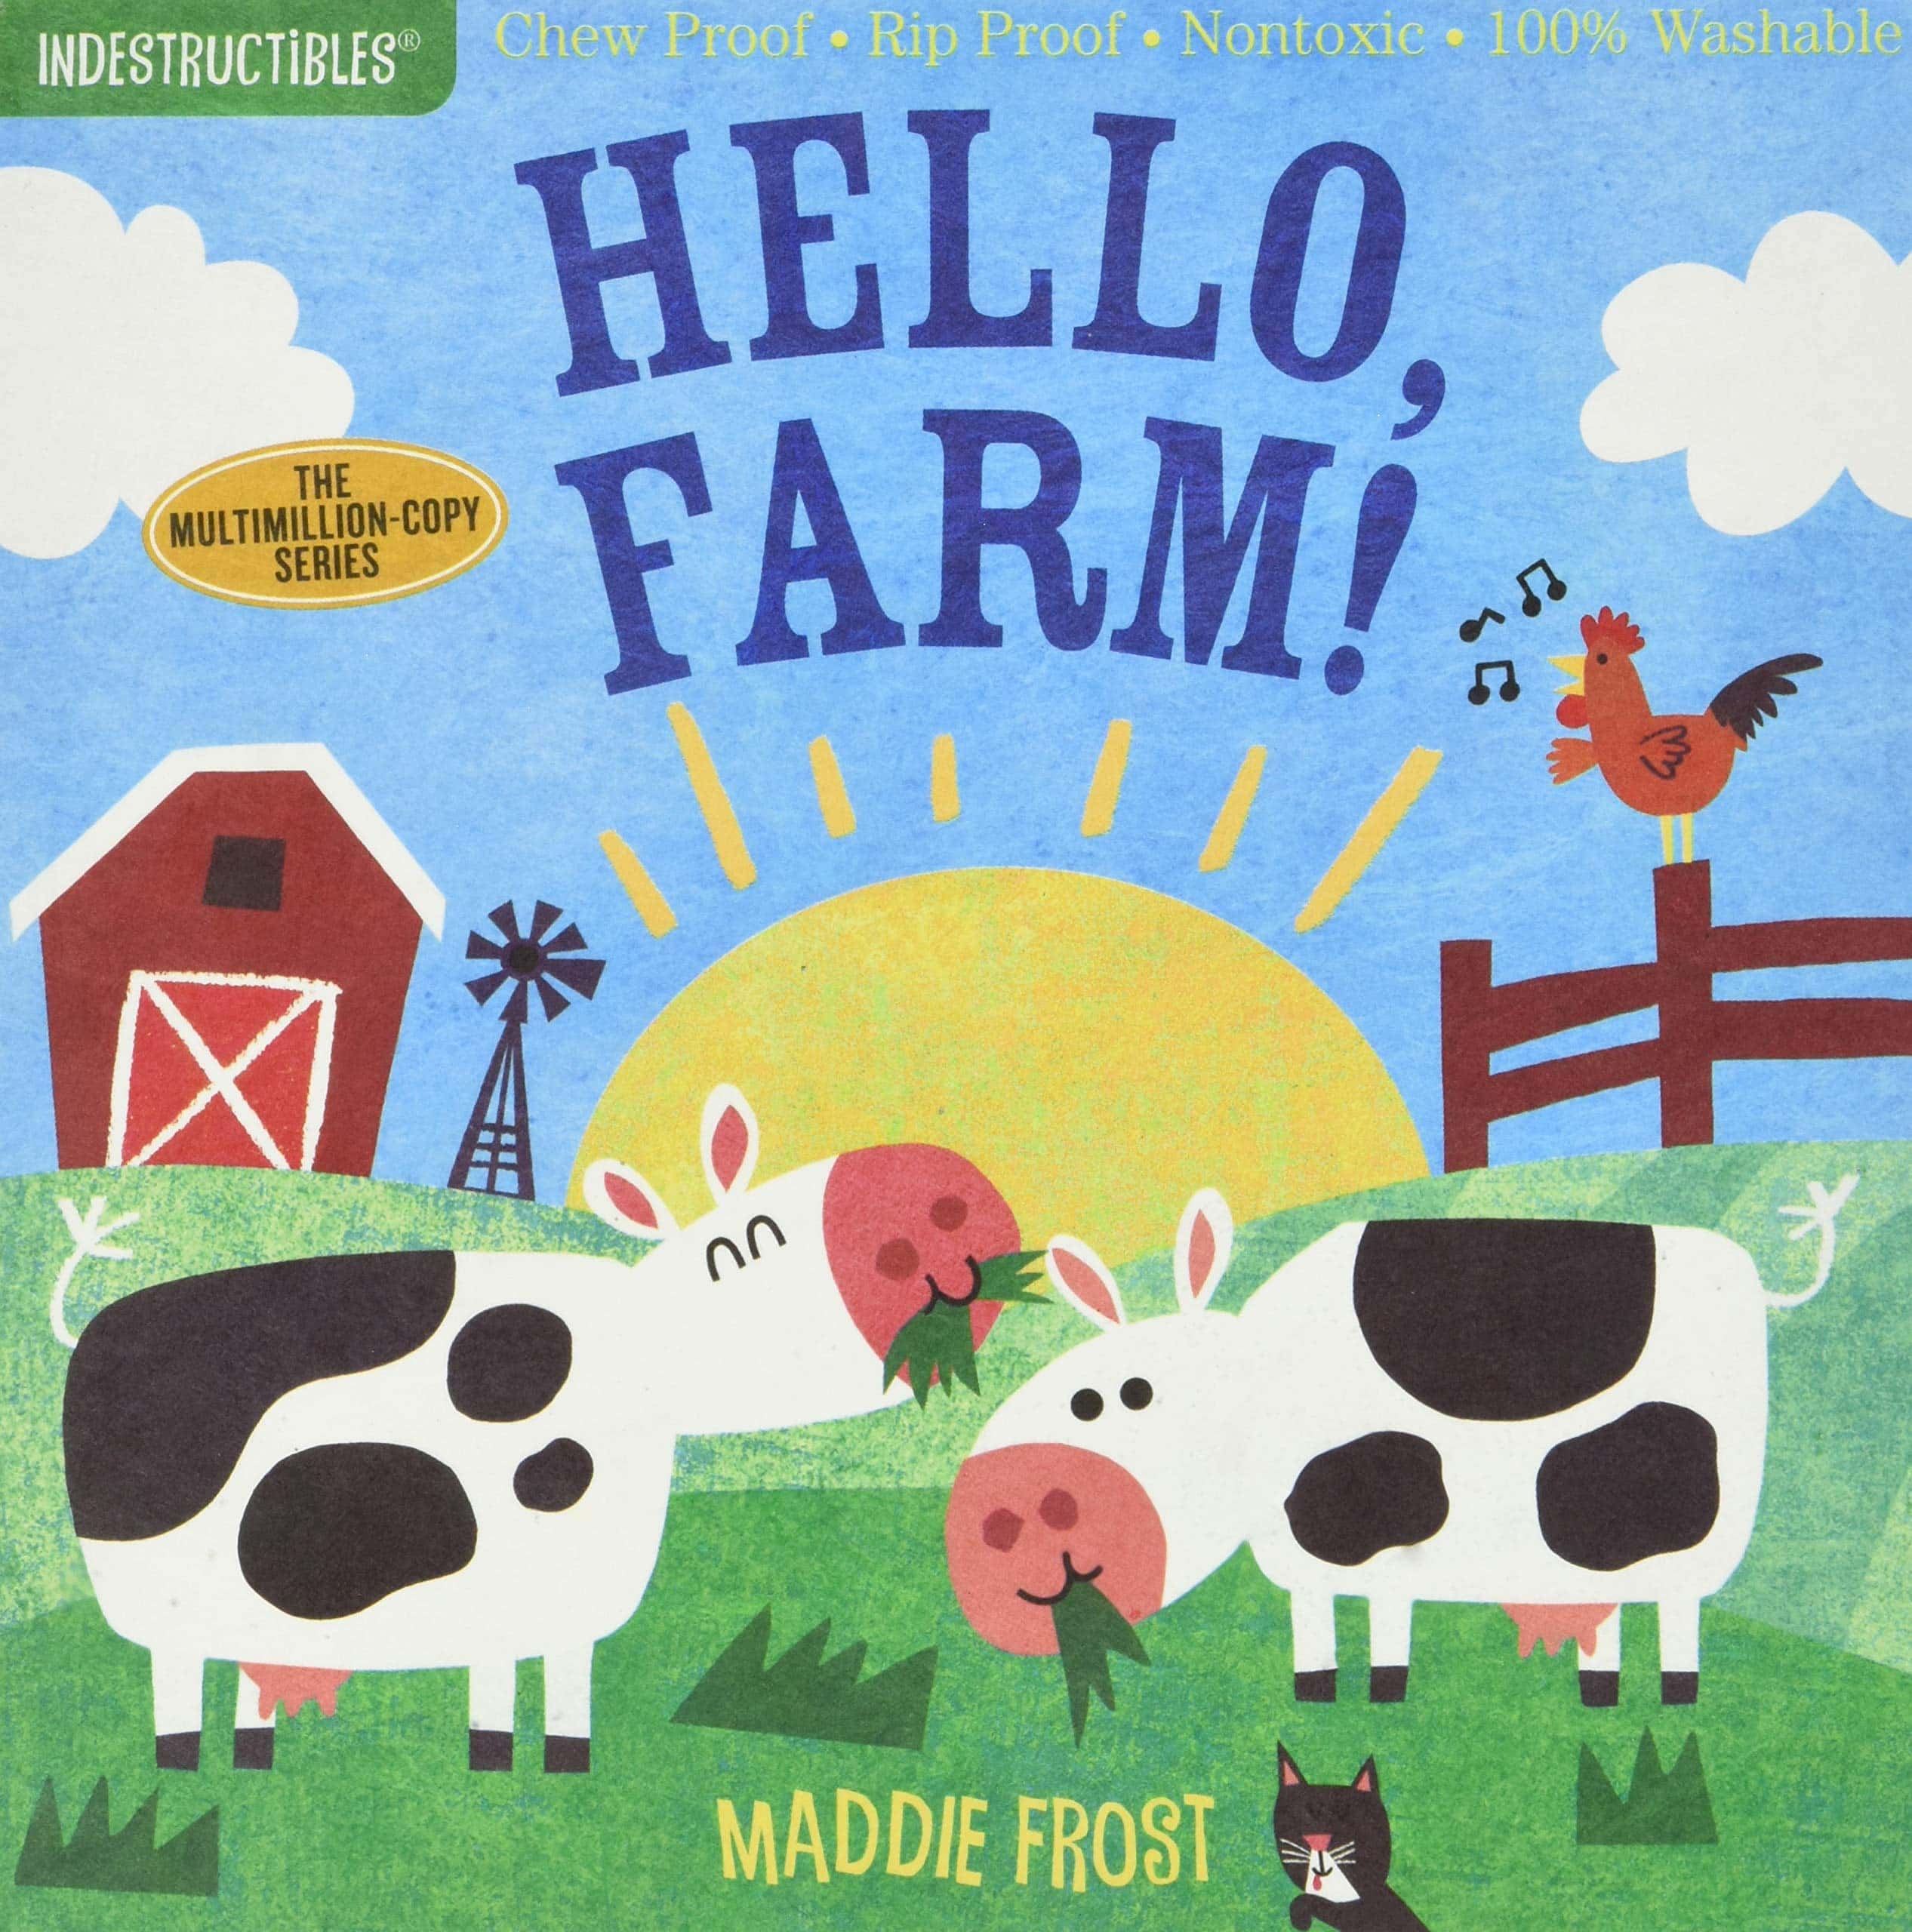 A book with a barn and two cows eating grass on the front with a singing chicken. 